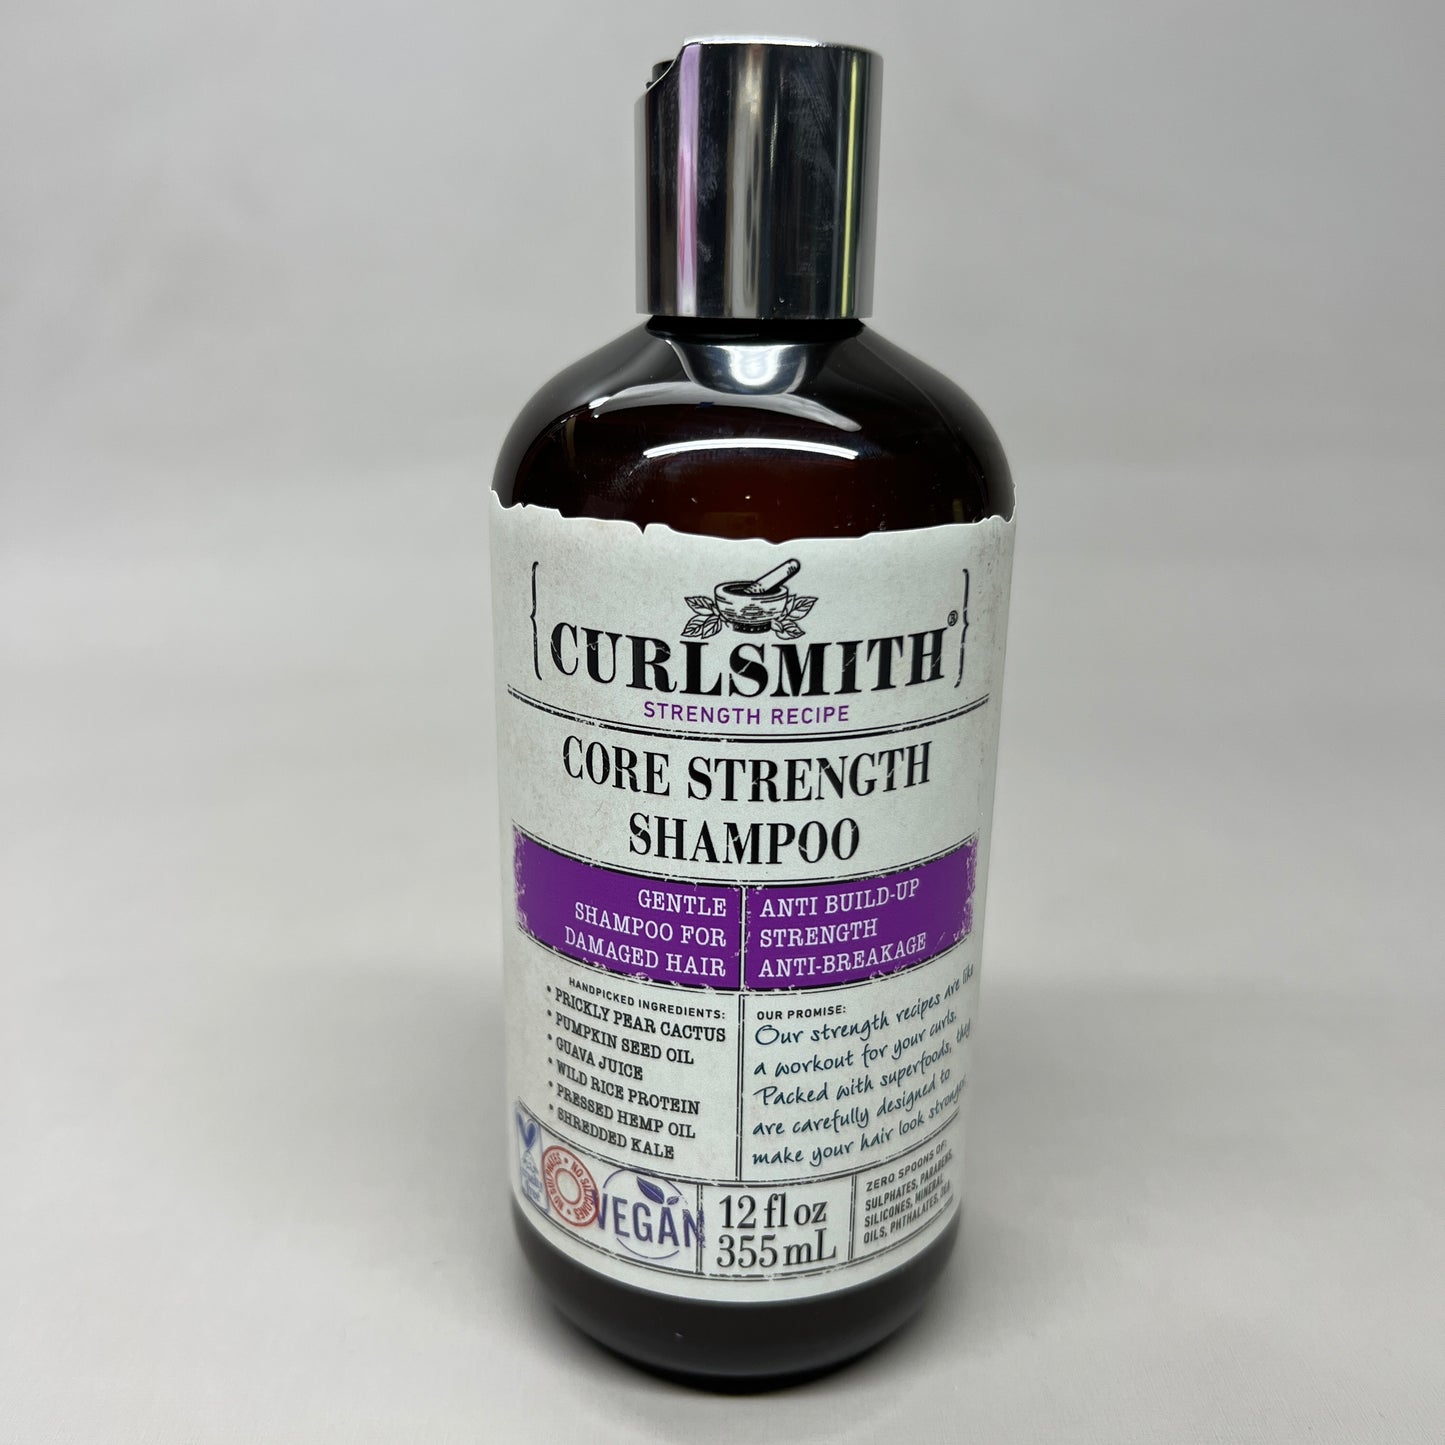 CURLSMITH Strength Complete Kit for Damaged Hair 4-Piece Kit (New Other)